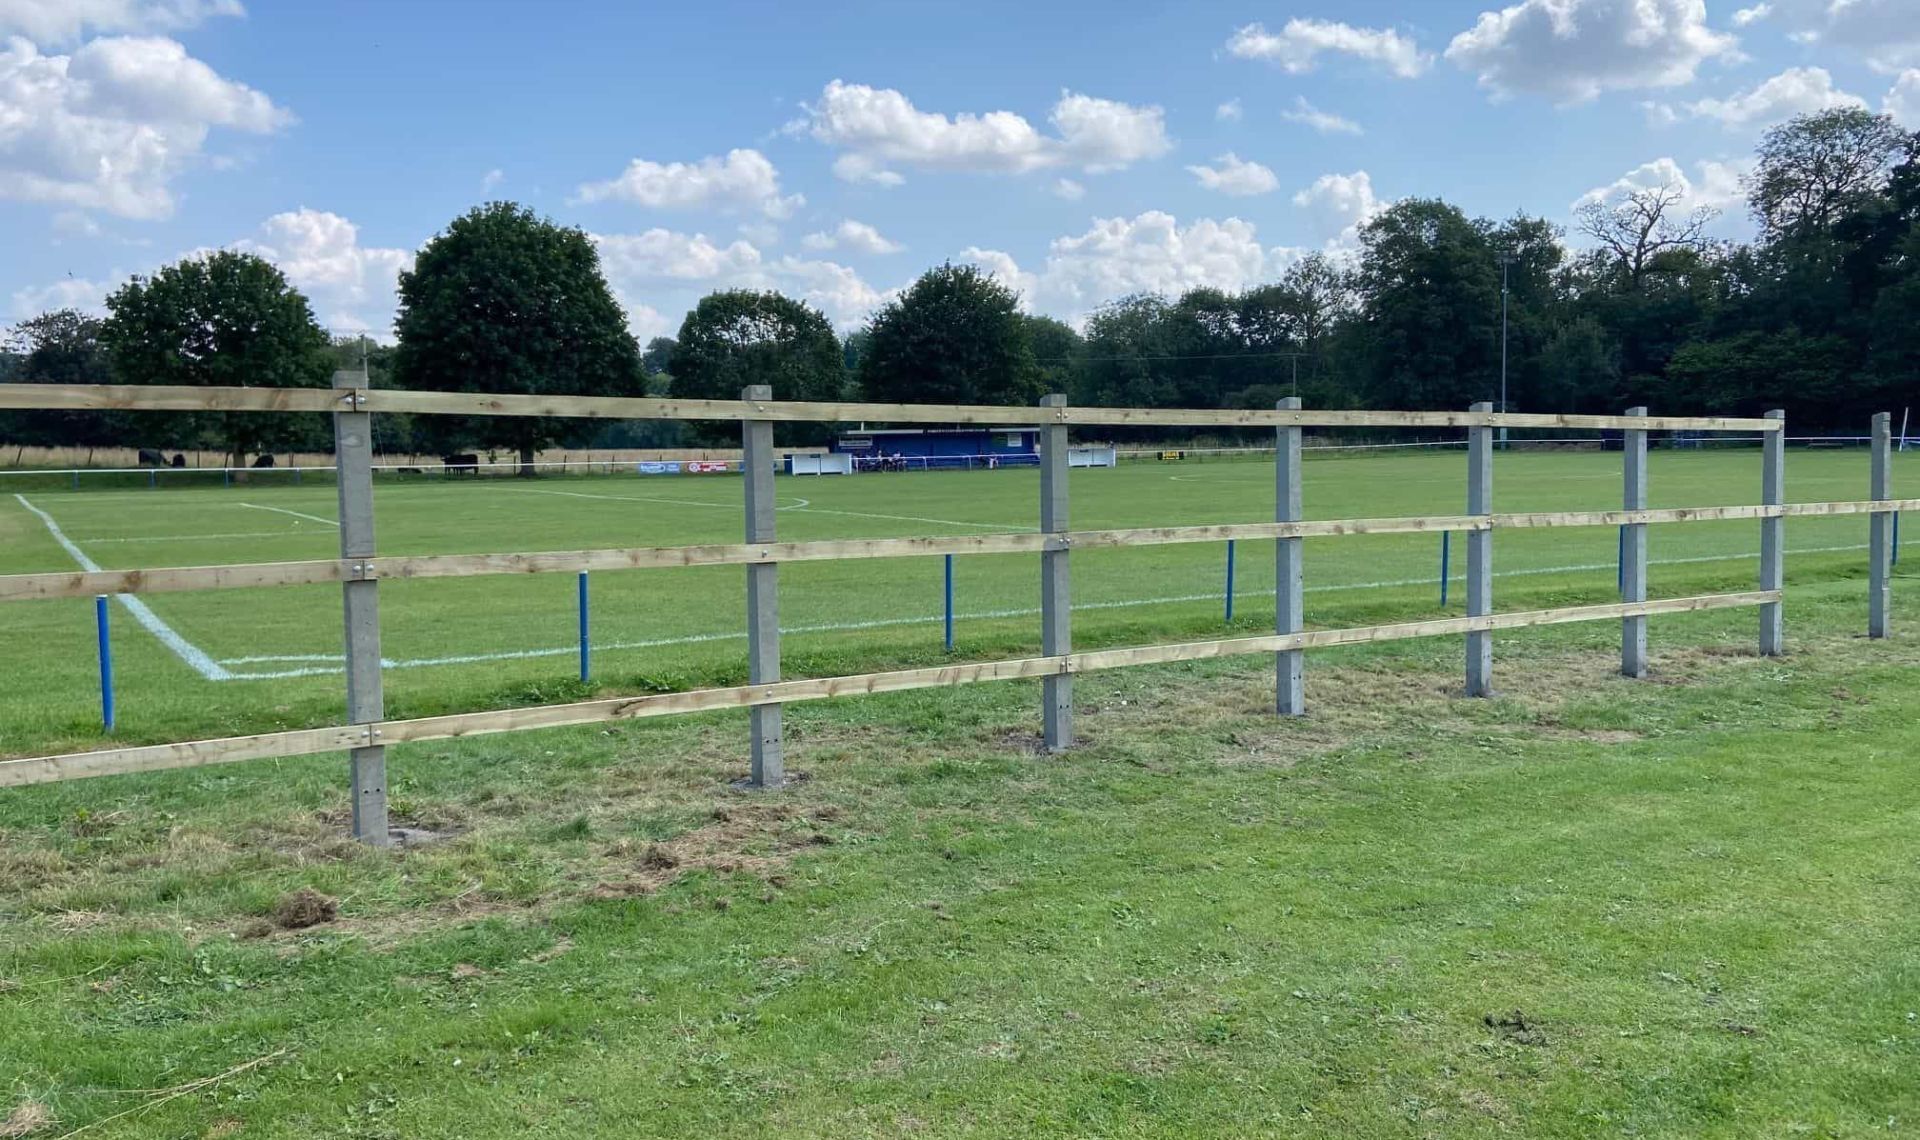 Fencing at amesbury football club close up early stages.